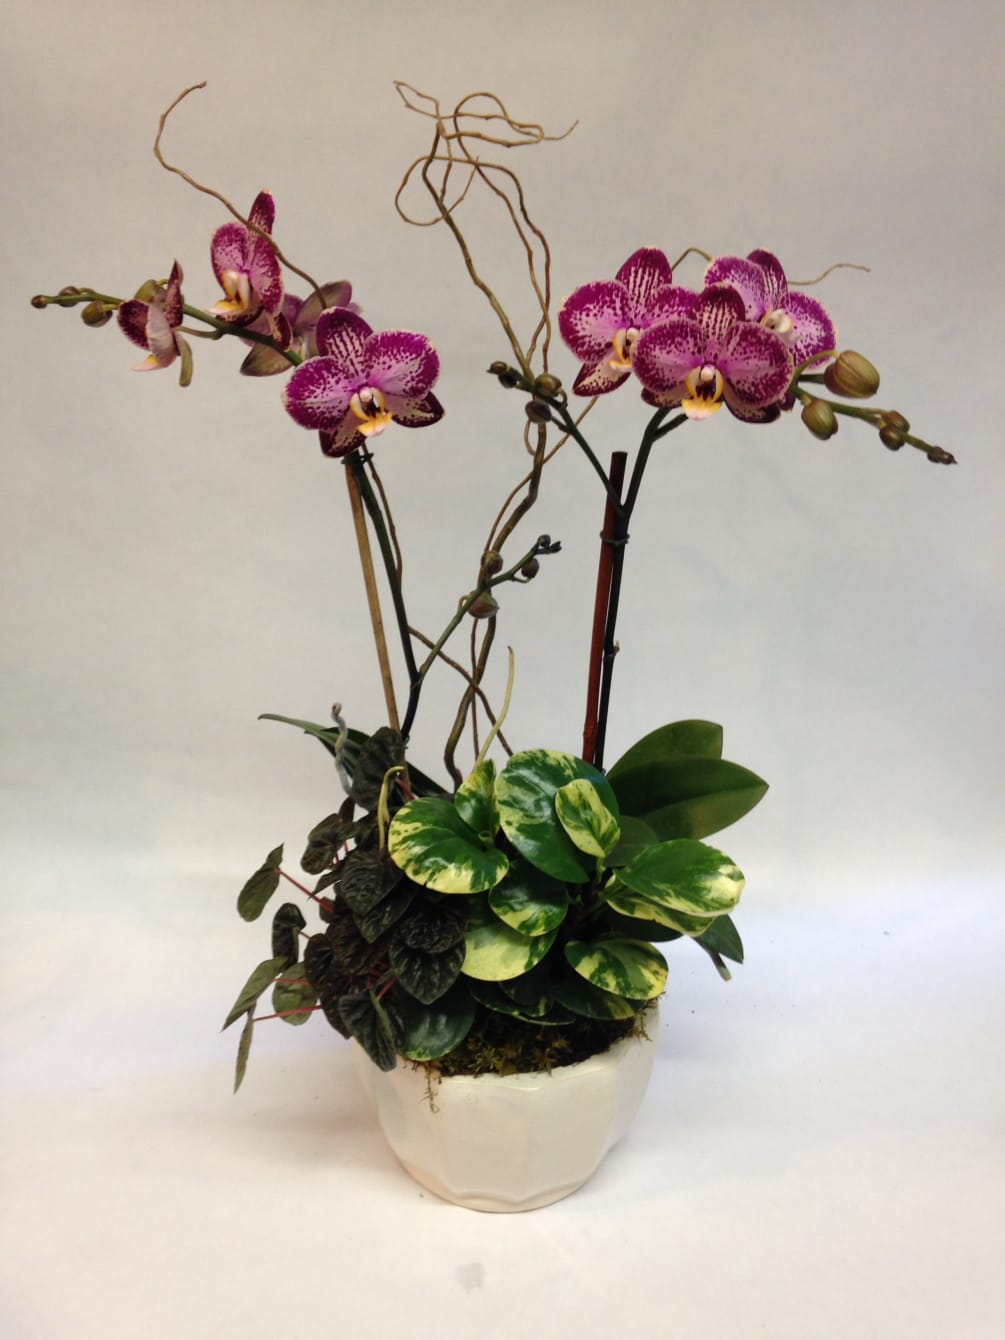 This planter comes complete with two stems orchid plant, curly willow, and